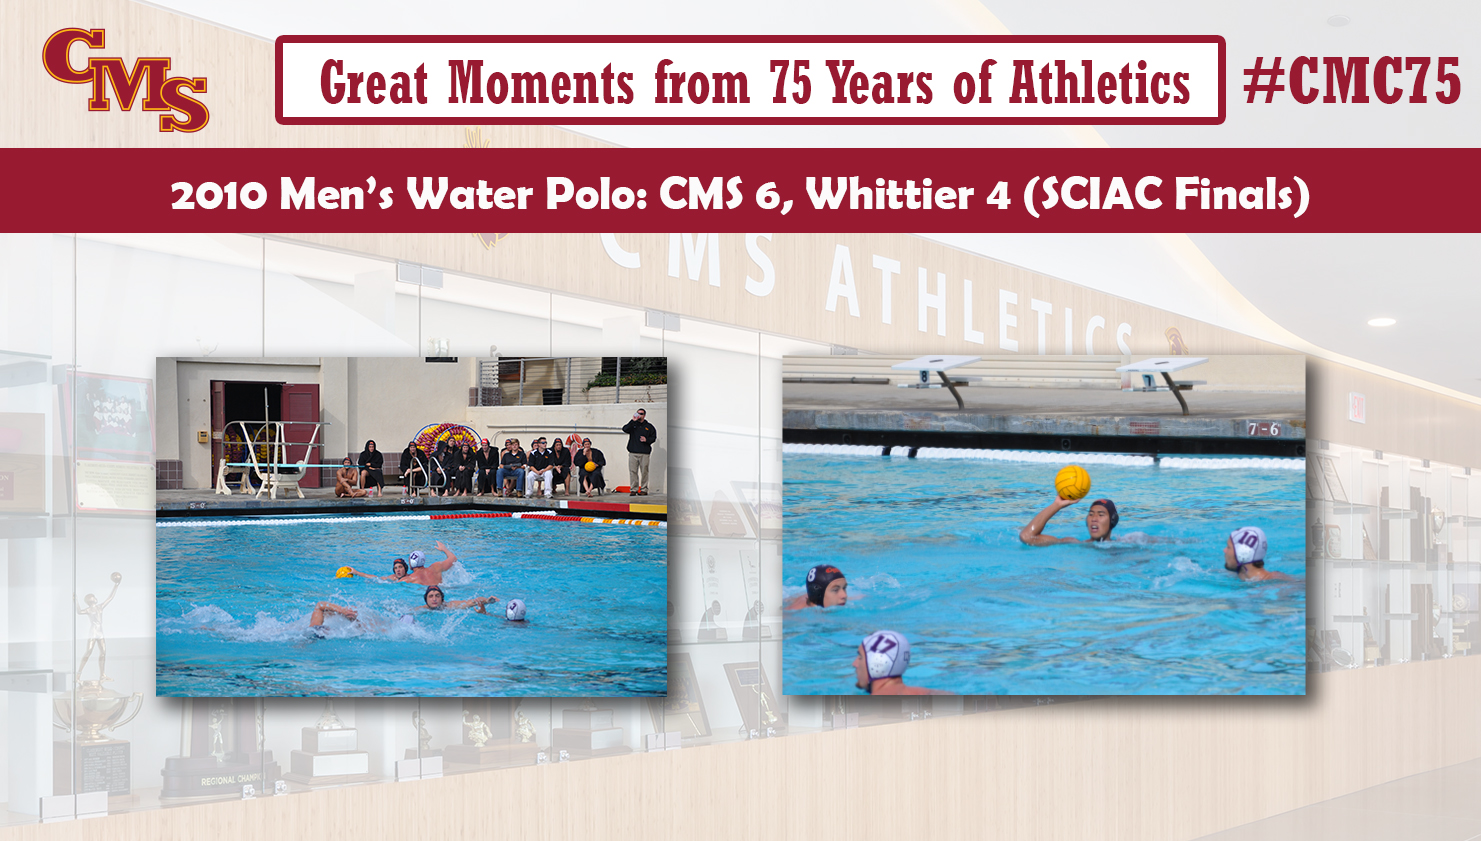 Action shots from the 2010 season. Words over the photo read: Great Moments from 75 Years of Athletics, 2010 Men's Water Polo: CMS 6, Whittier 4 (SCIAC Finals)